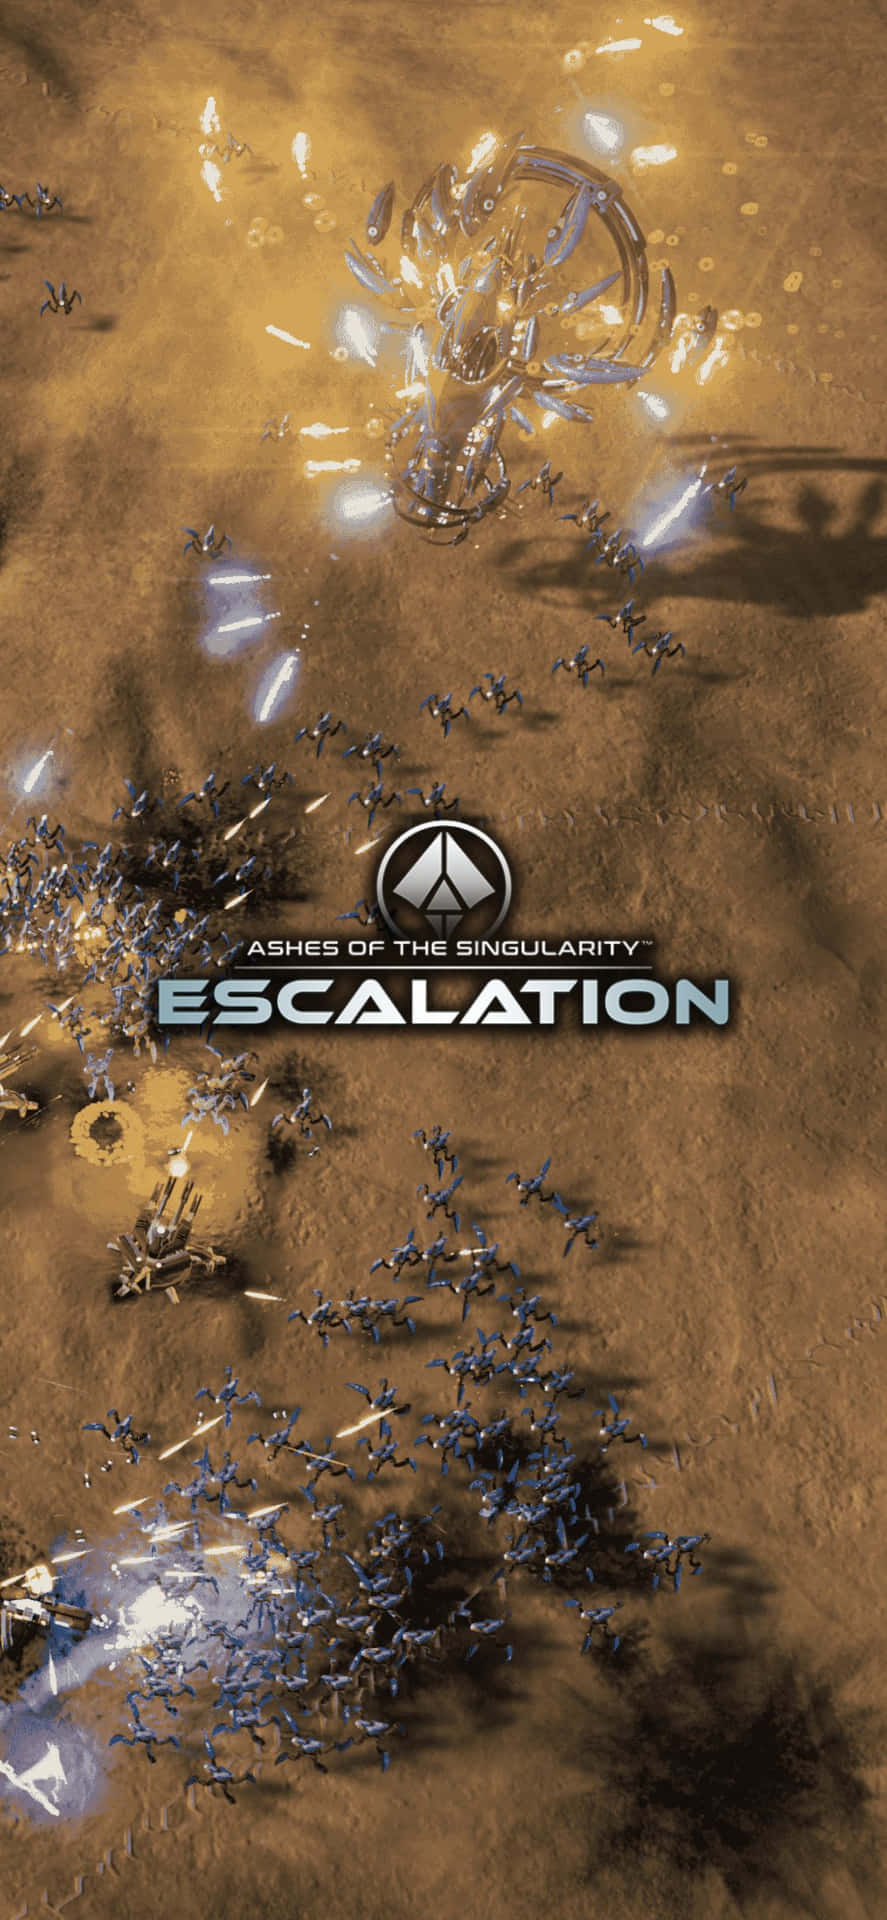 Play the innovative game, Ashes of the Singularity: Escalation, on your Iphone X